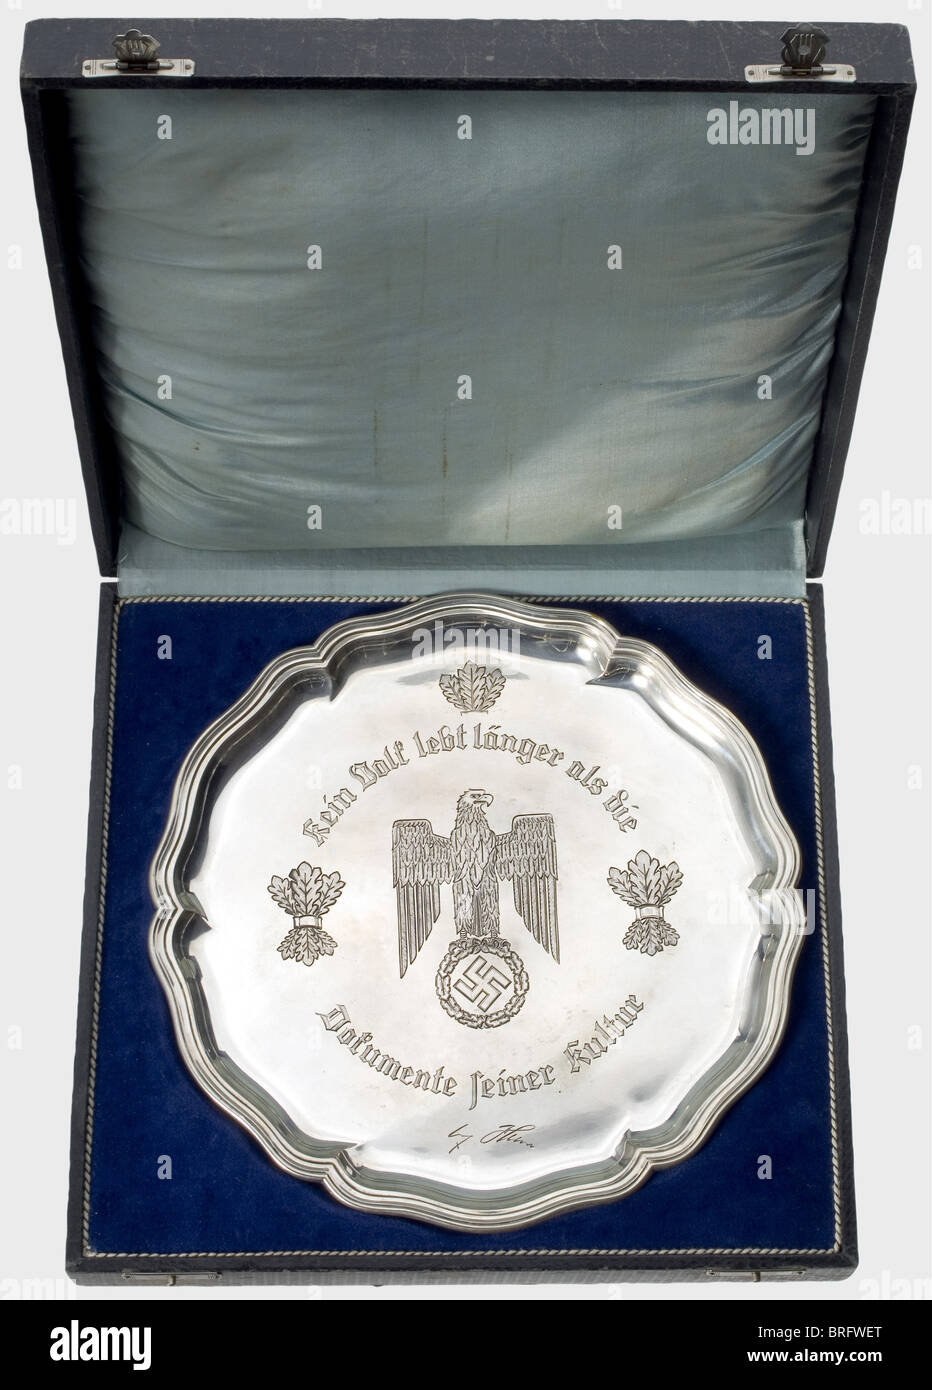 A silver presentation bowl.,Rose-bordered plate with the heraldic eagle,oak leaf bundles,and the inscription,'Kein Volk lebt länger als die Dokumente seiner Kultur'(No people lives longer than the documents of its culture)along with a facsimile signature of Adolf Hitler engraved in the centre. The silversmith's mark 'Wellner' and the hallmark '800' on the back. Weight 521 g. Diameter 30 cm. It comes with the certificate awarding the title of professor(envelope with punch-holes)to the Senior Administrative Councilor,Dr. Berthold Widmann,Reich's Commiss,Additional-Rights-Clearences-Not Available Stock Photo